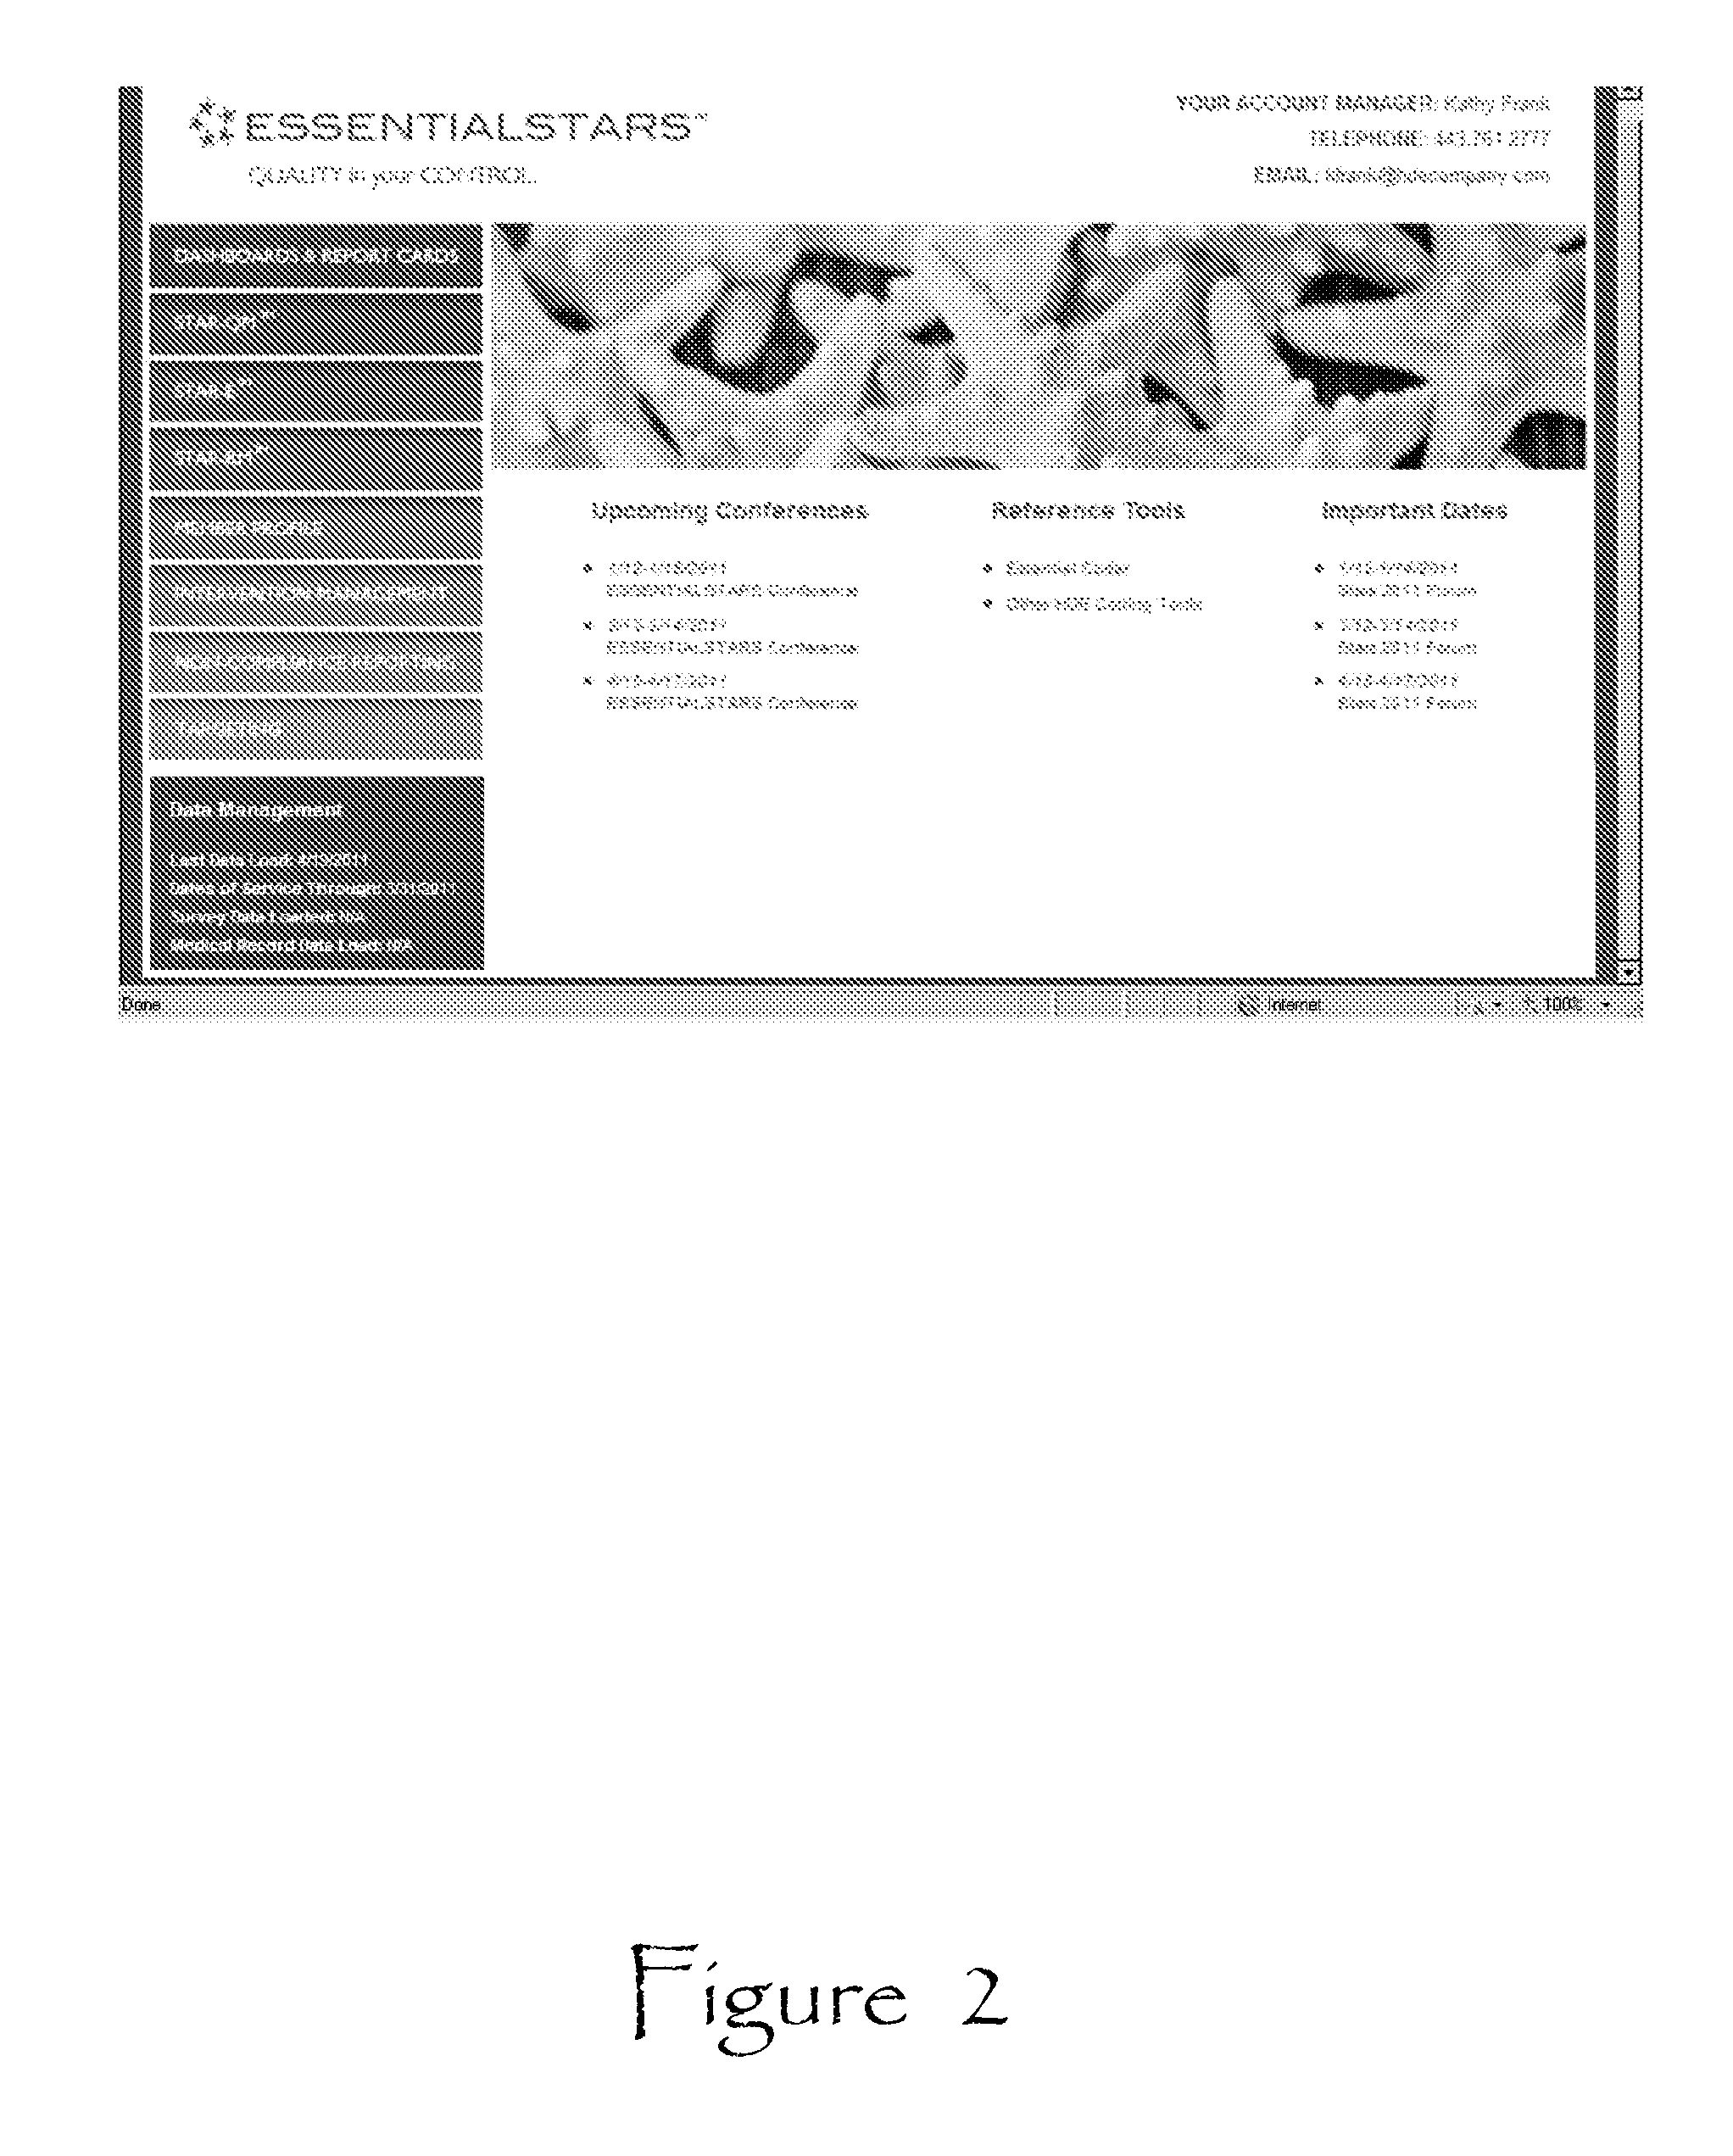 System and method for monitoring and measuring quality performance of health care delivery and service